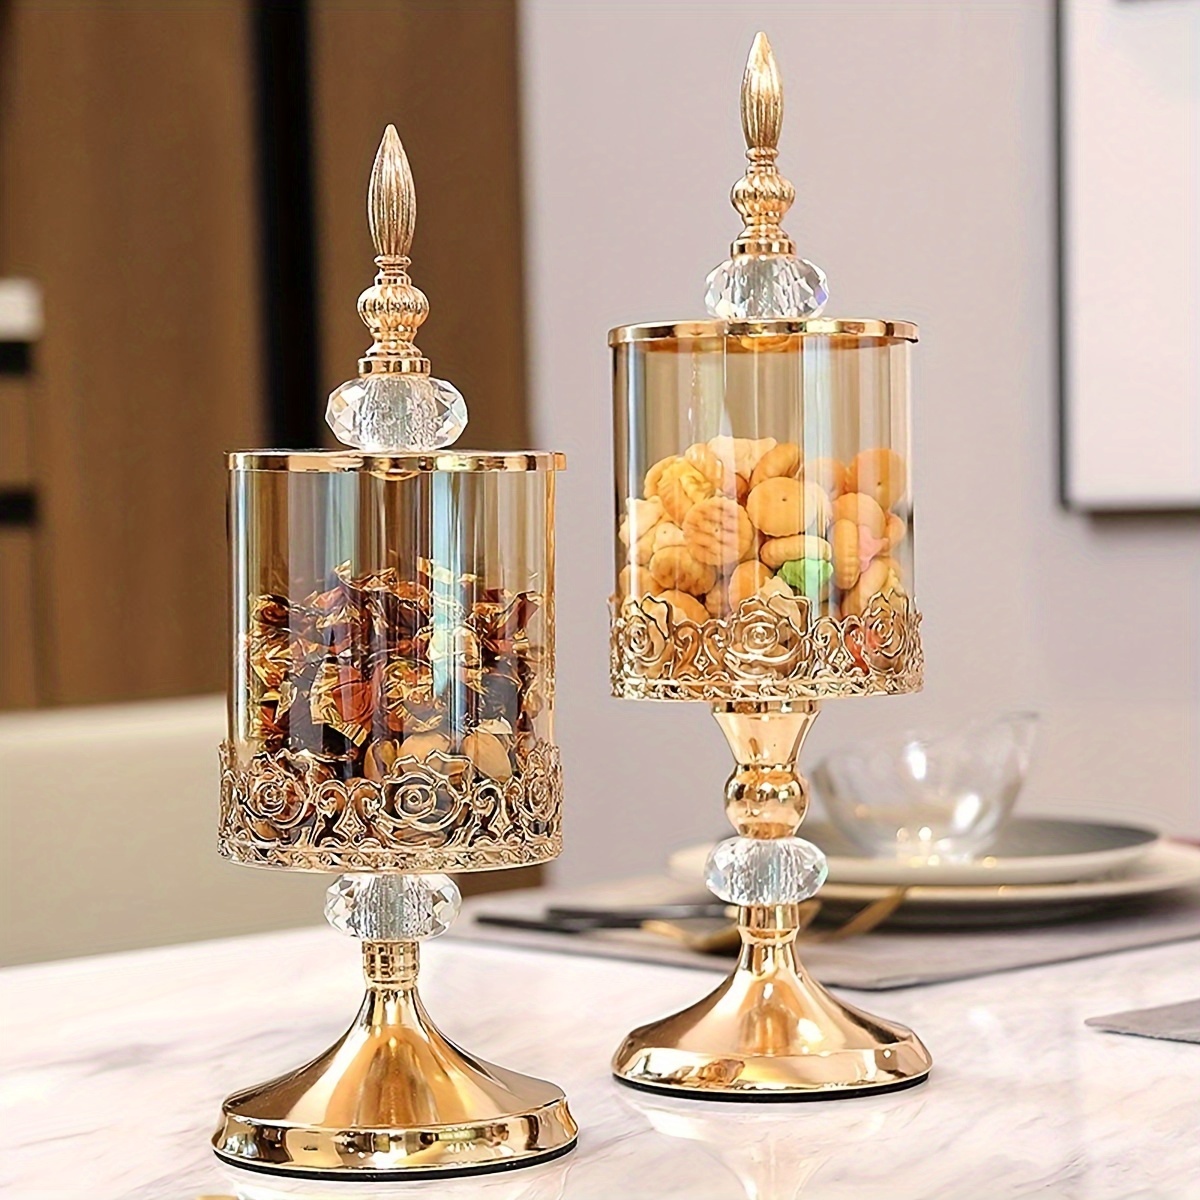 

European Style Glass Candy Jar With Lid - Luxurious Crystal Clear Storage Container For Living Room Table Decor, Elegant Floral Design Candy Server With Gold Base - Available In 2 Sizes